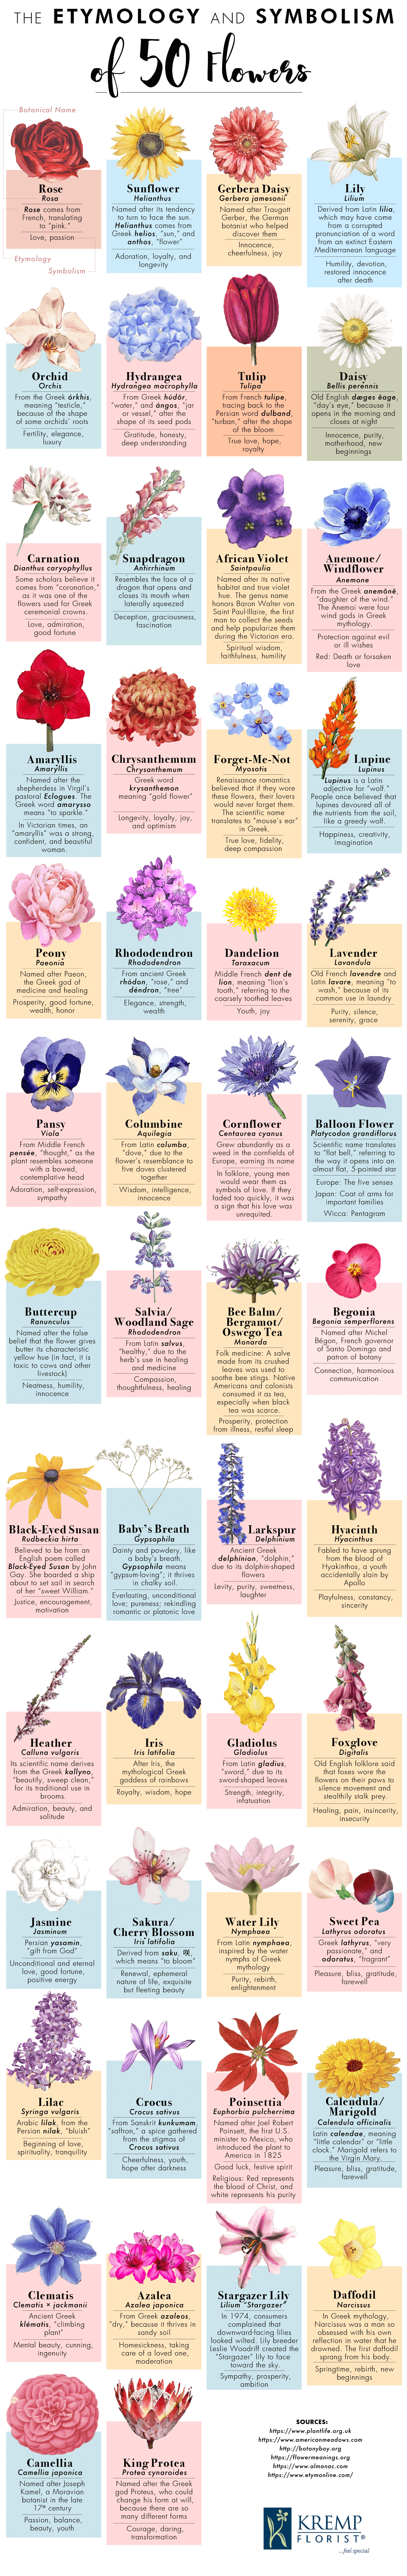 Here Are the Meanings Behind 50 Common Flowers in One Chart ...